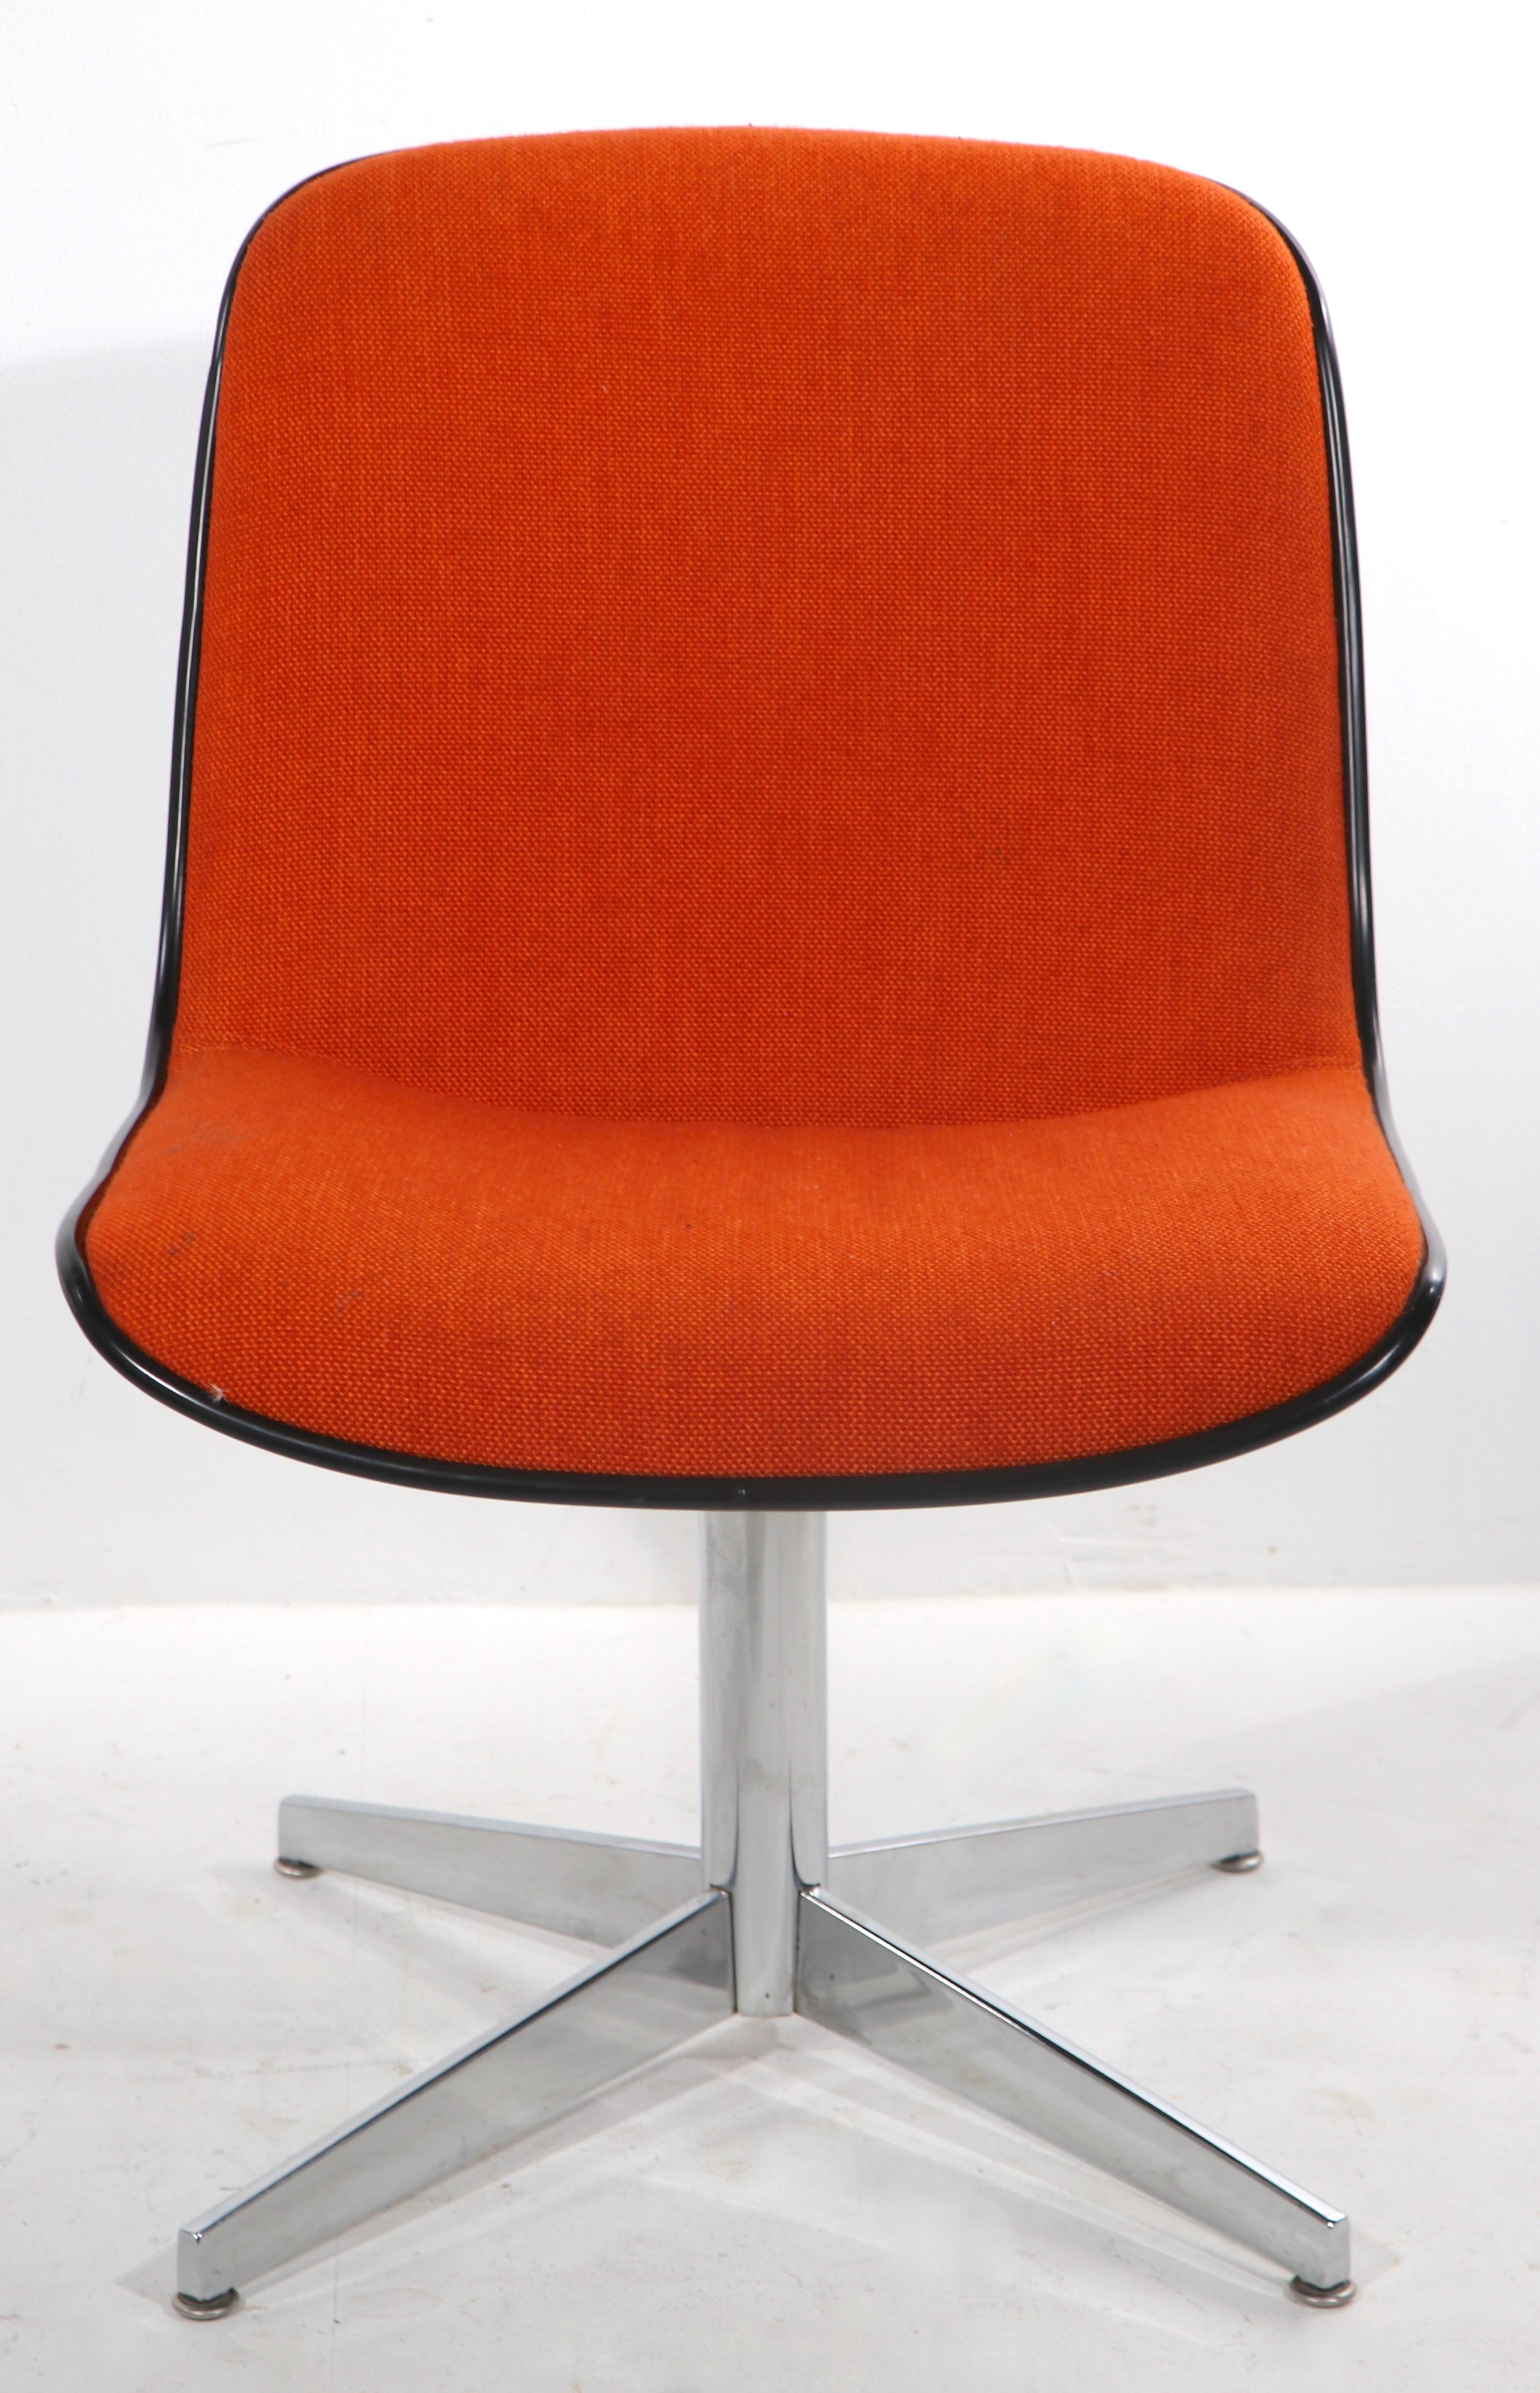 20th Century Post Modern Office Desk Chairs by Steelcase